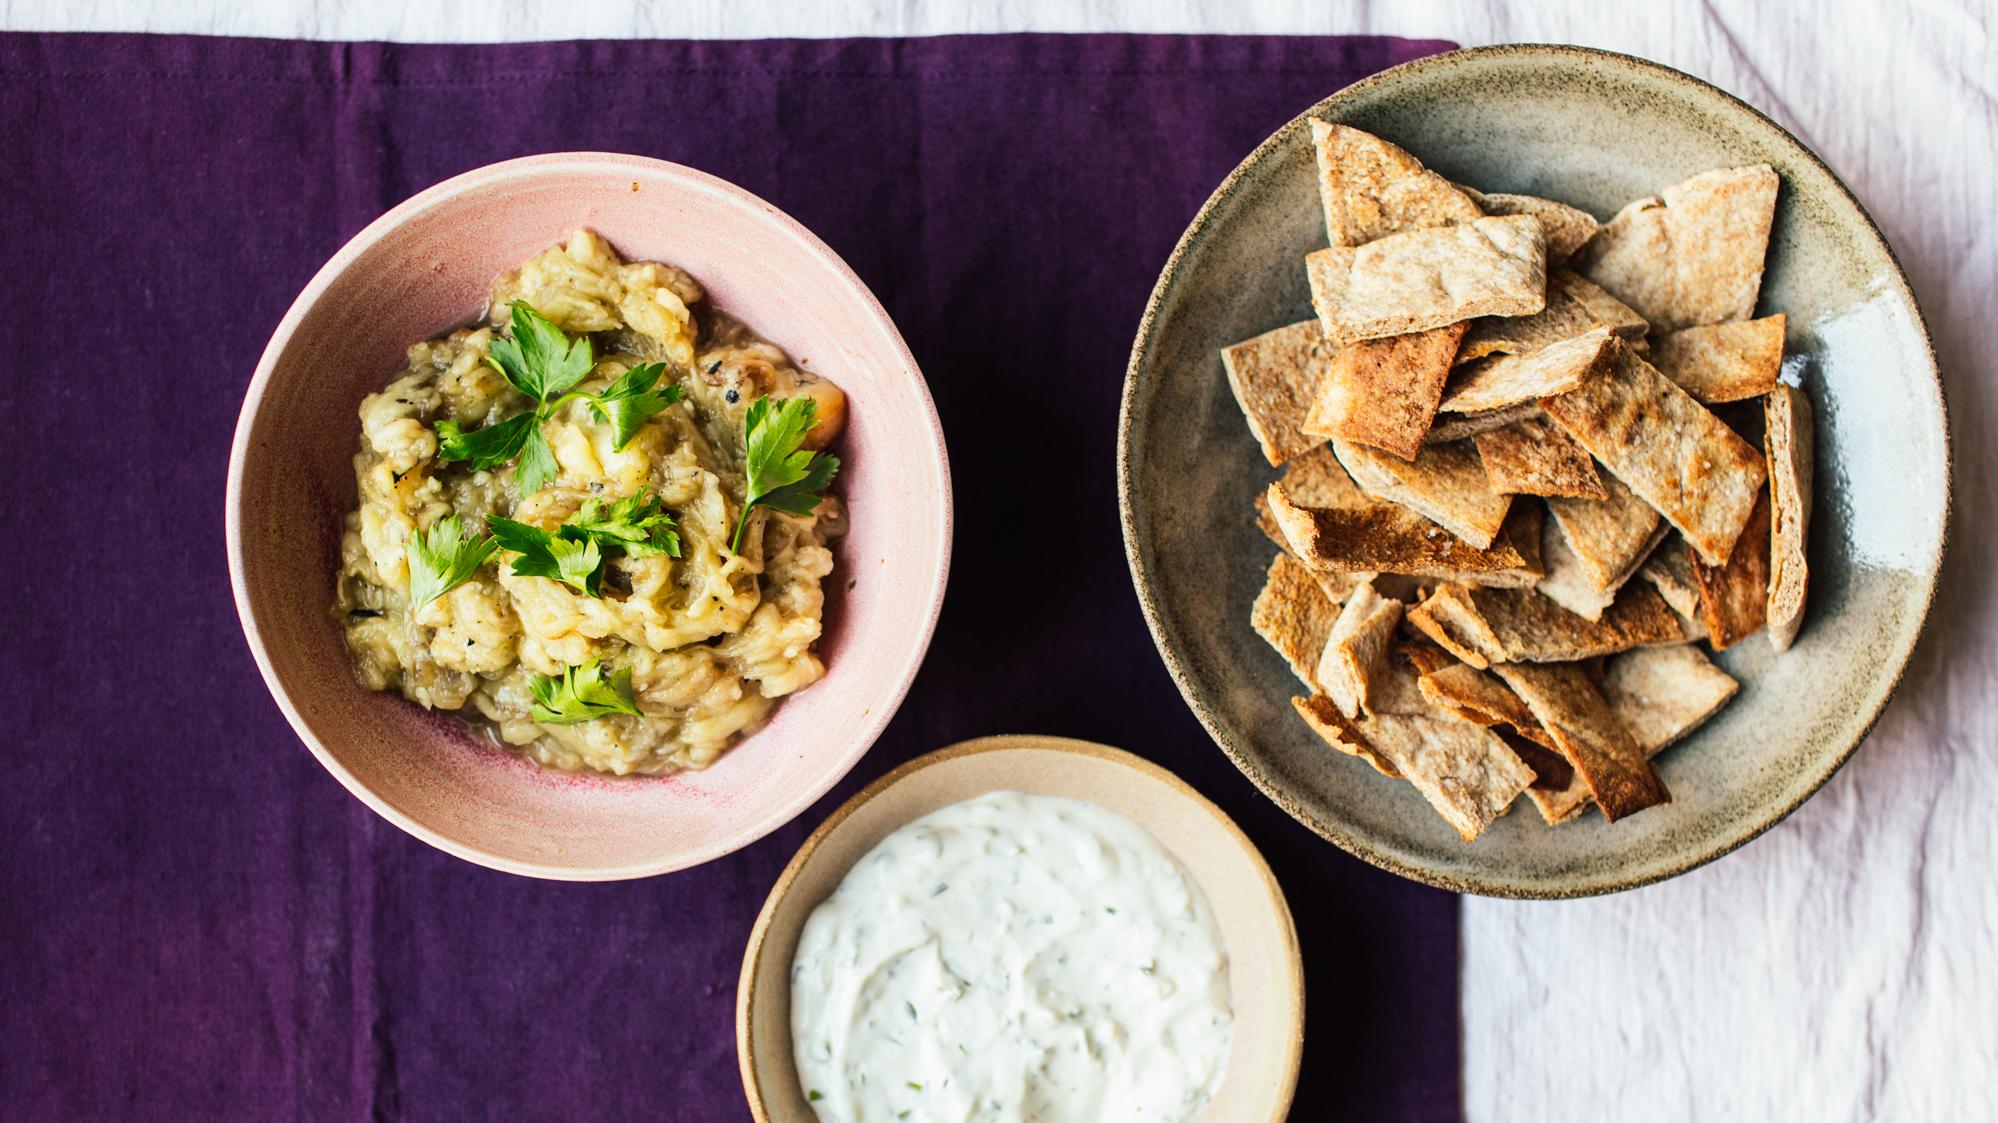 Indulge in Israel’s Famous Eggplant Caviar At Home